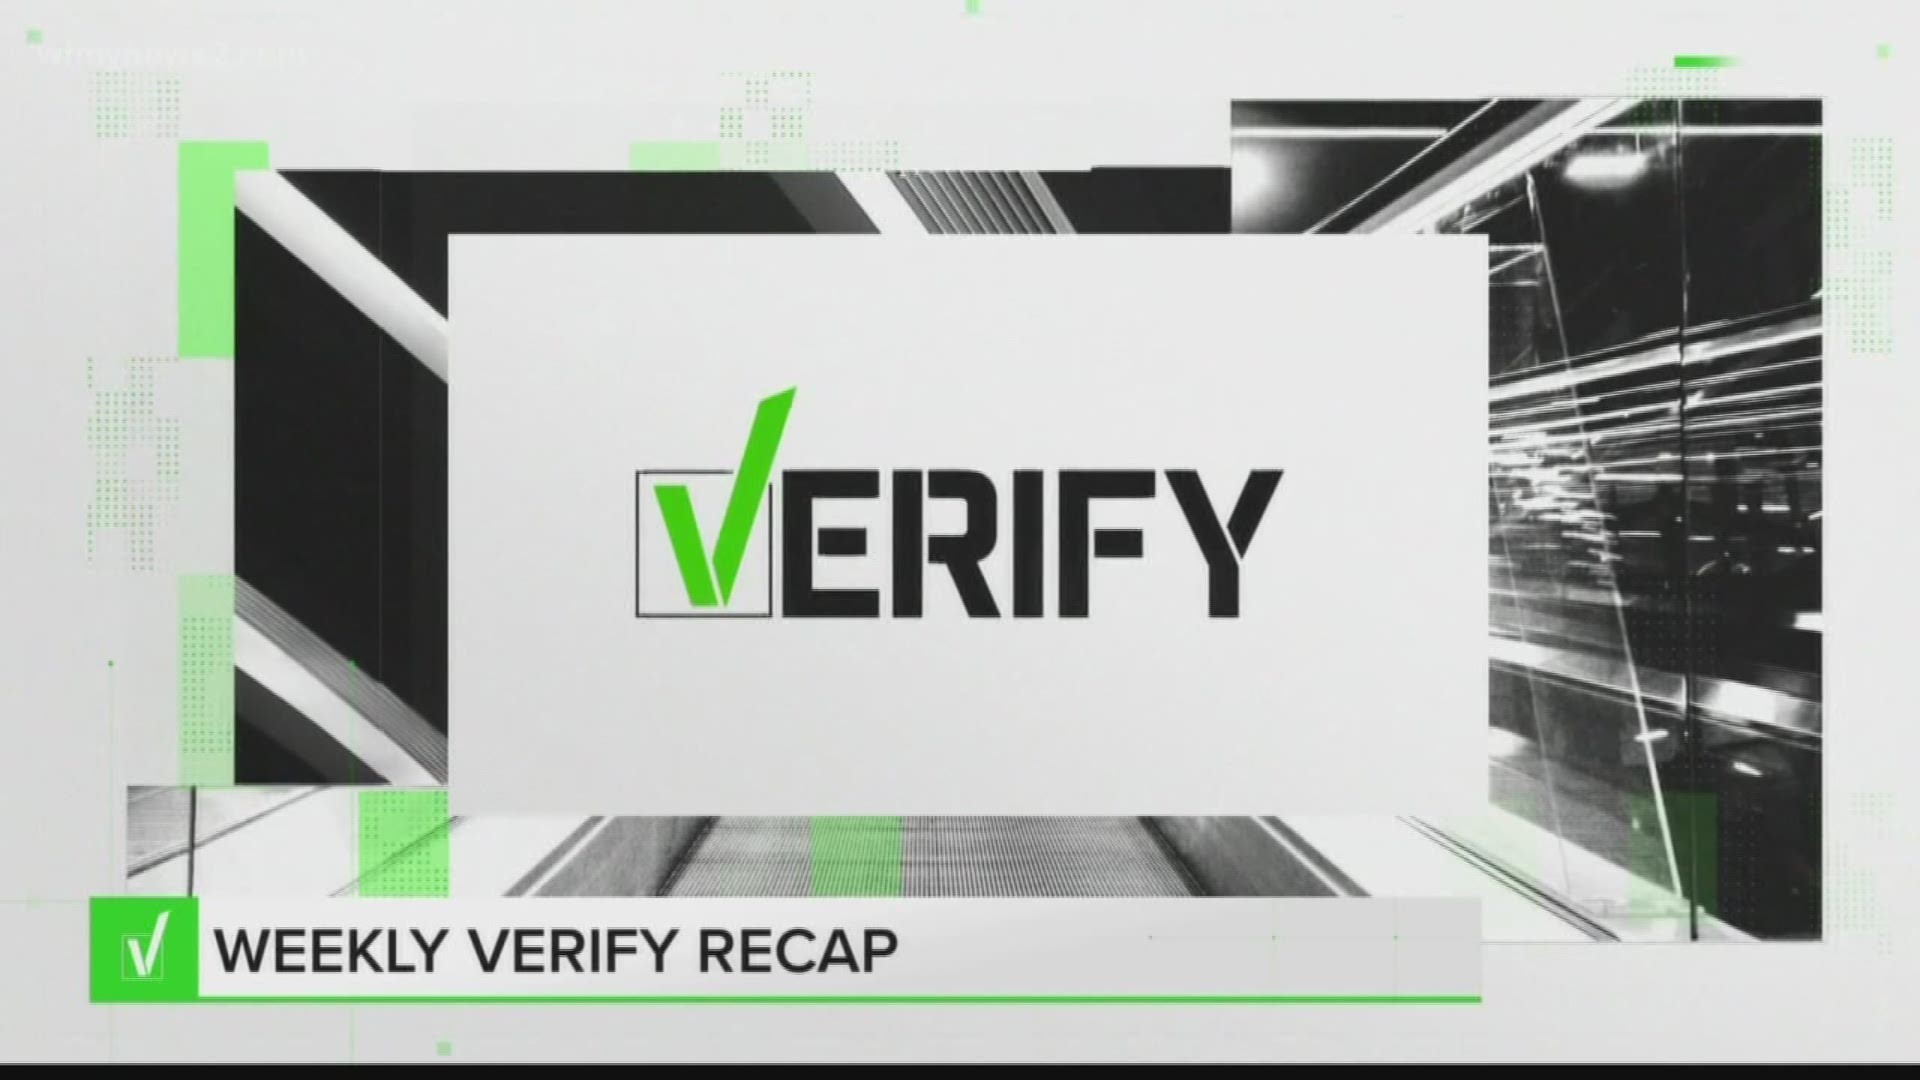 From a permanent Daylight Saving Time bill to snow predictions this winter, the VERIFY team answered your questions the week of Oct. 14.